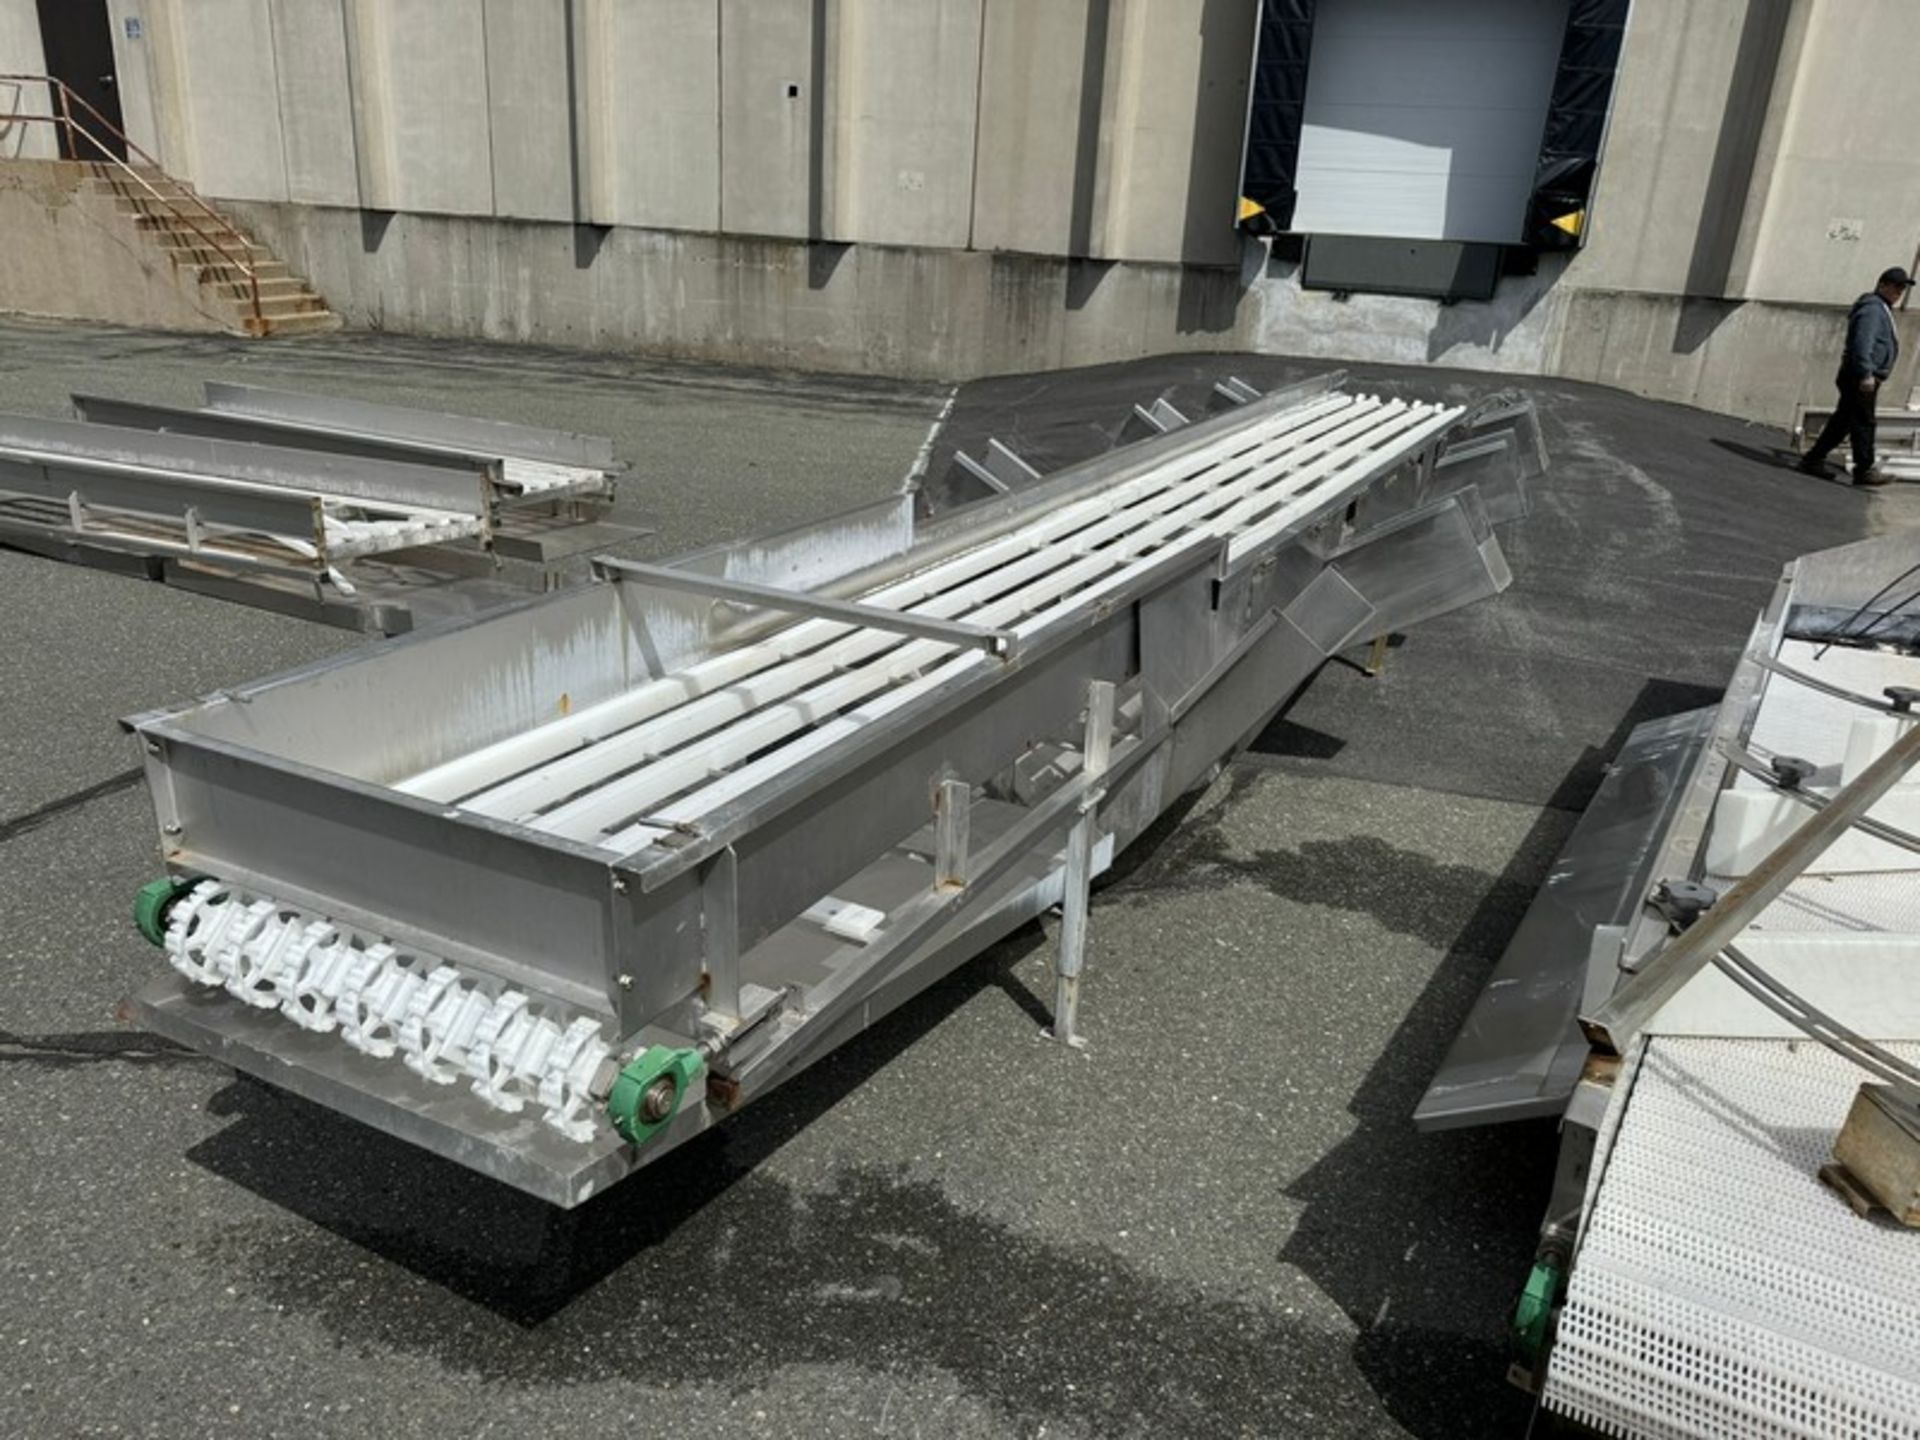 Straight Section of Conveyor - Image 2 of 5